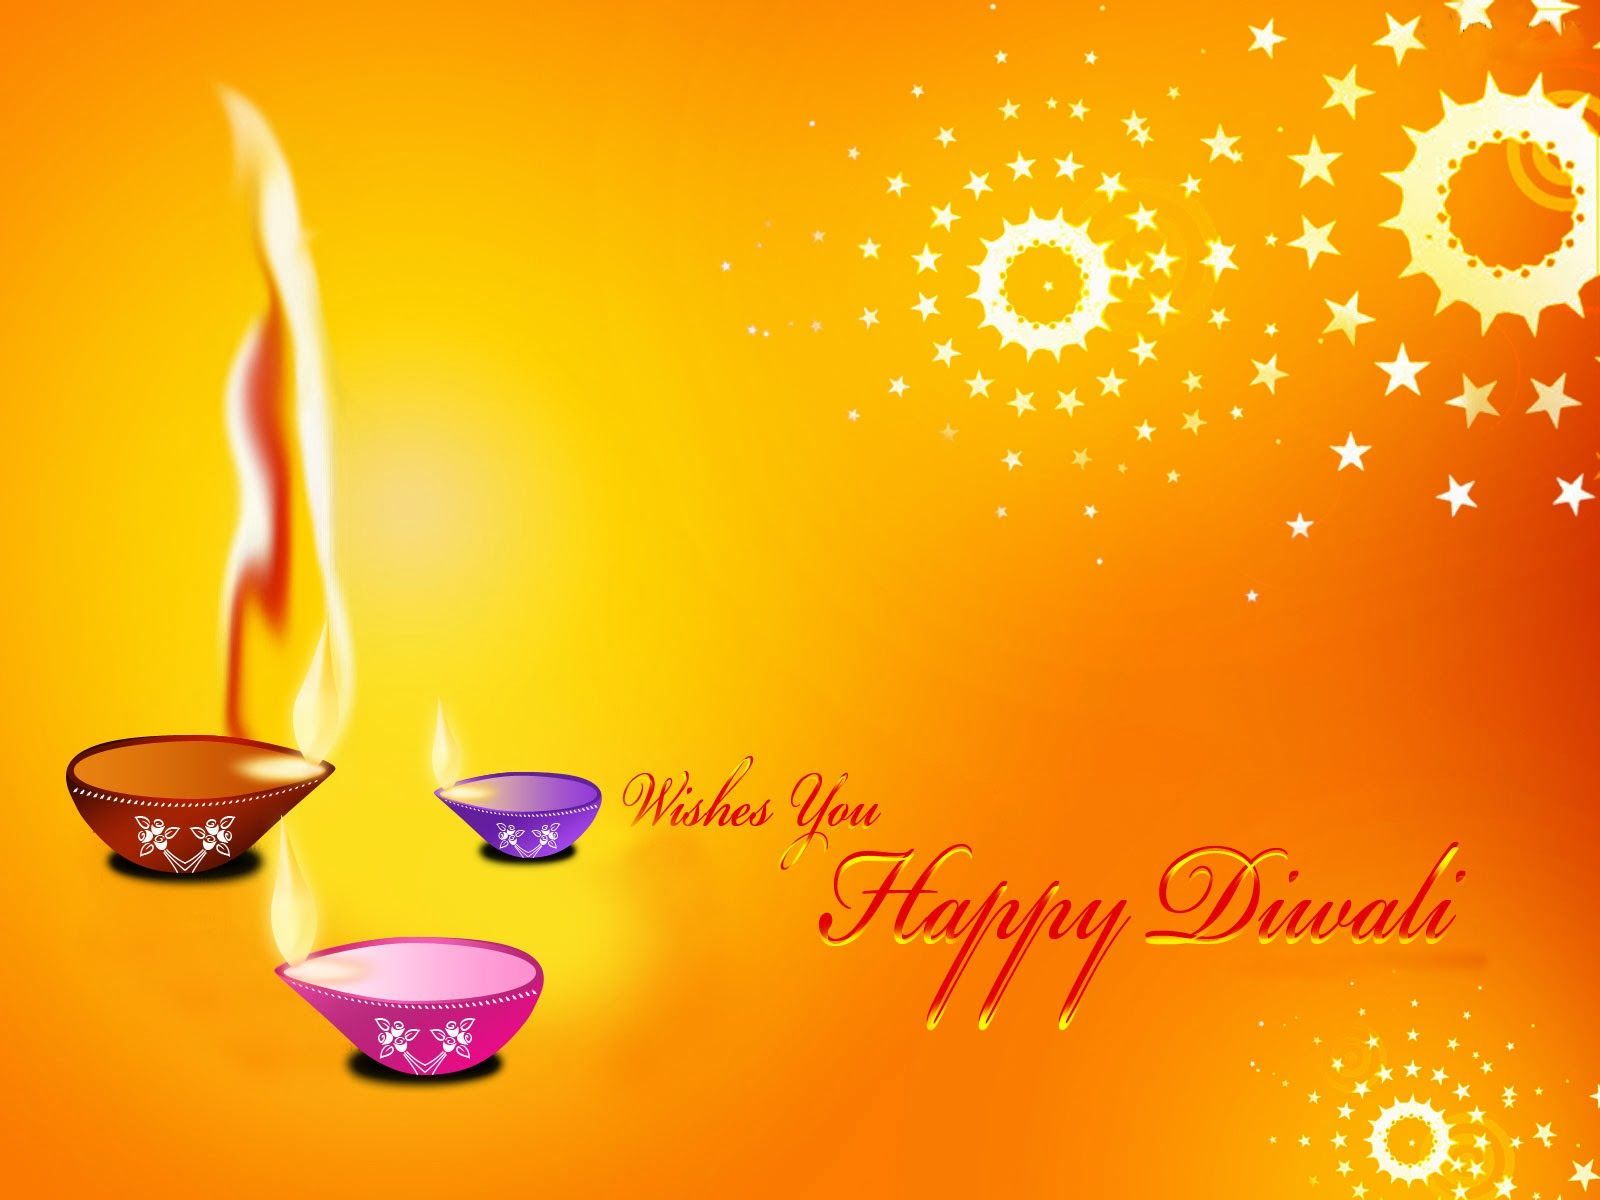 Happy Diwali Background Download Free CDR file  Happy diwali Diwali  wishes Diwali festival of lights